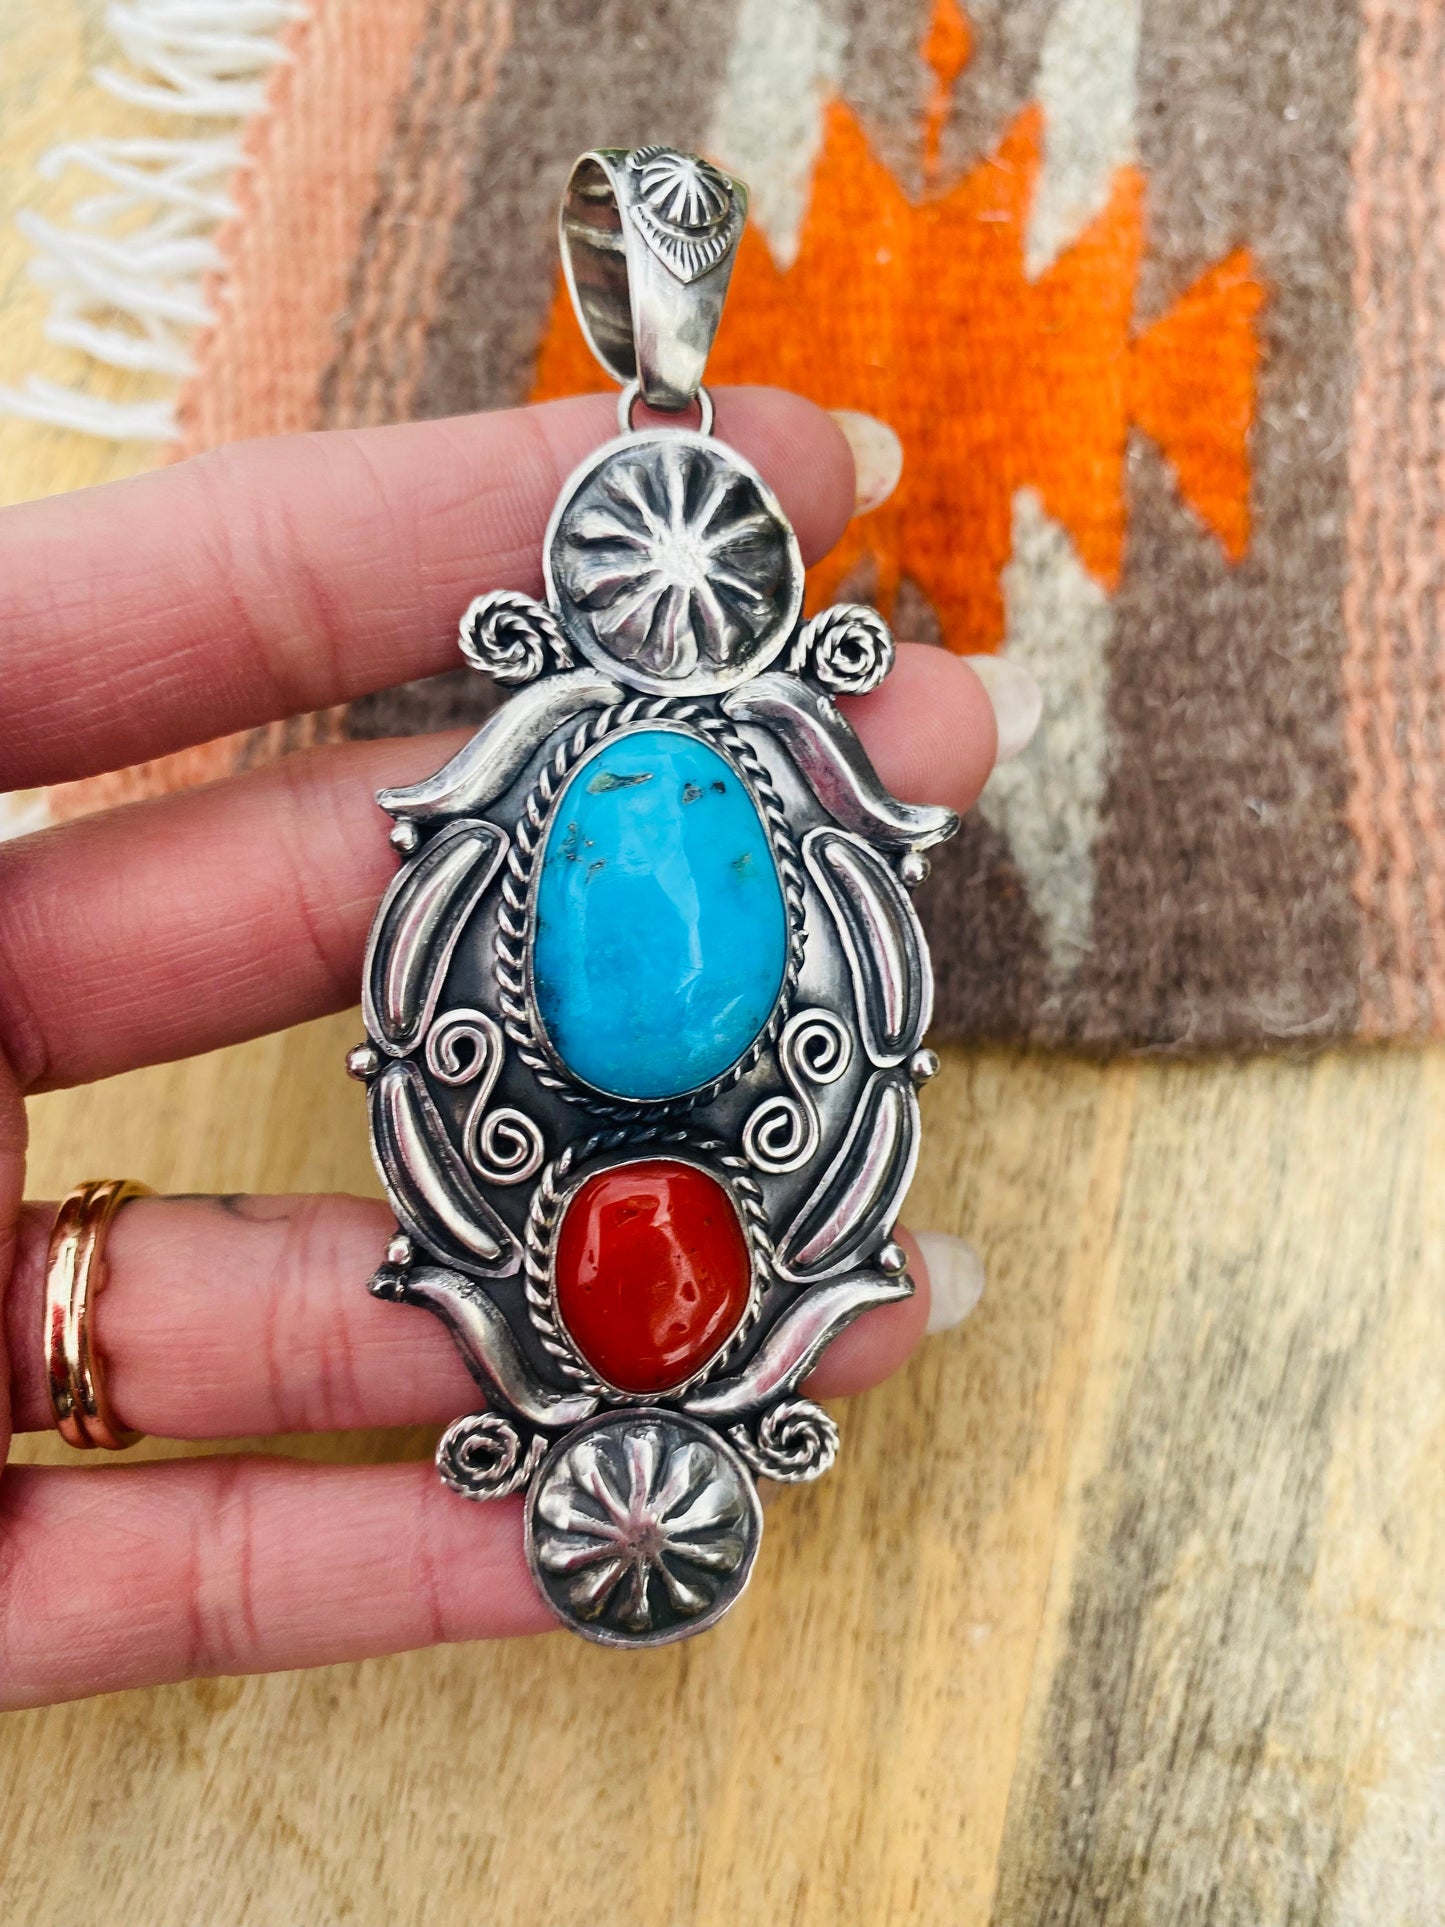 Navajo Sterling Silver, Kingman Turquoise & Coral Pendant Signed